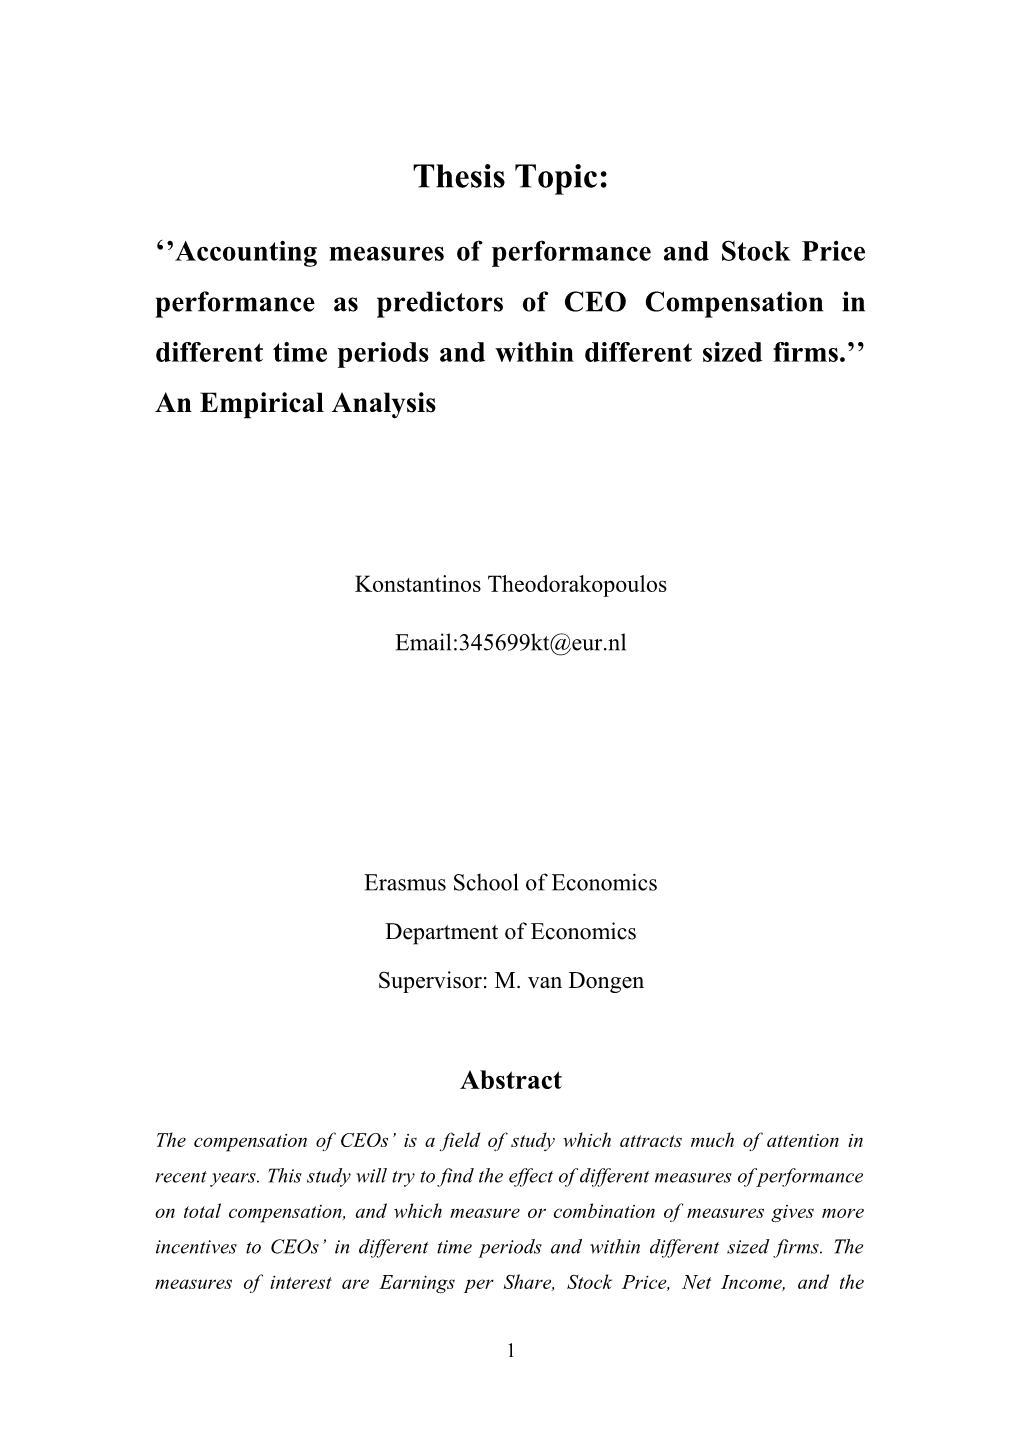 Accounting Measures of Performance and Stock Price Performance As Predictors of CEO